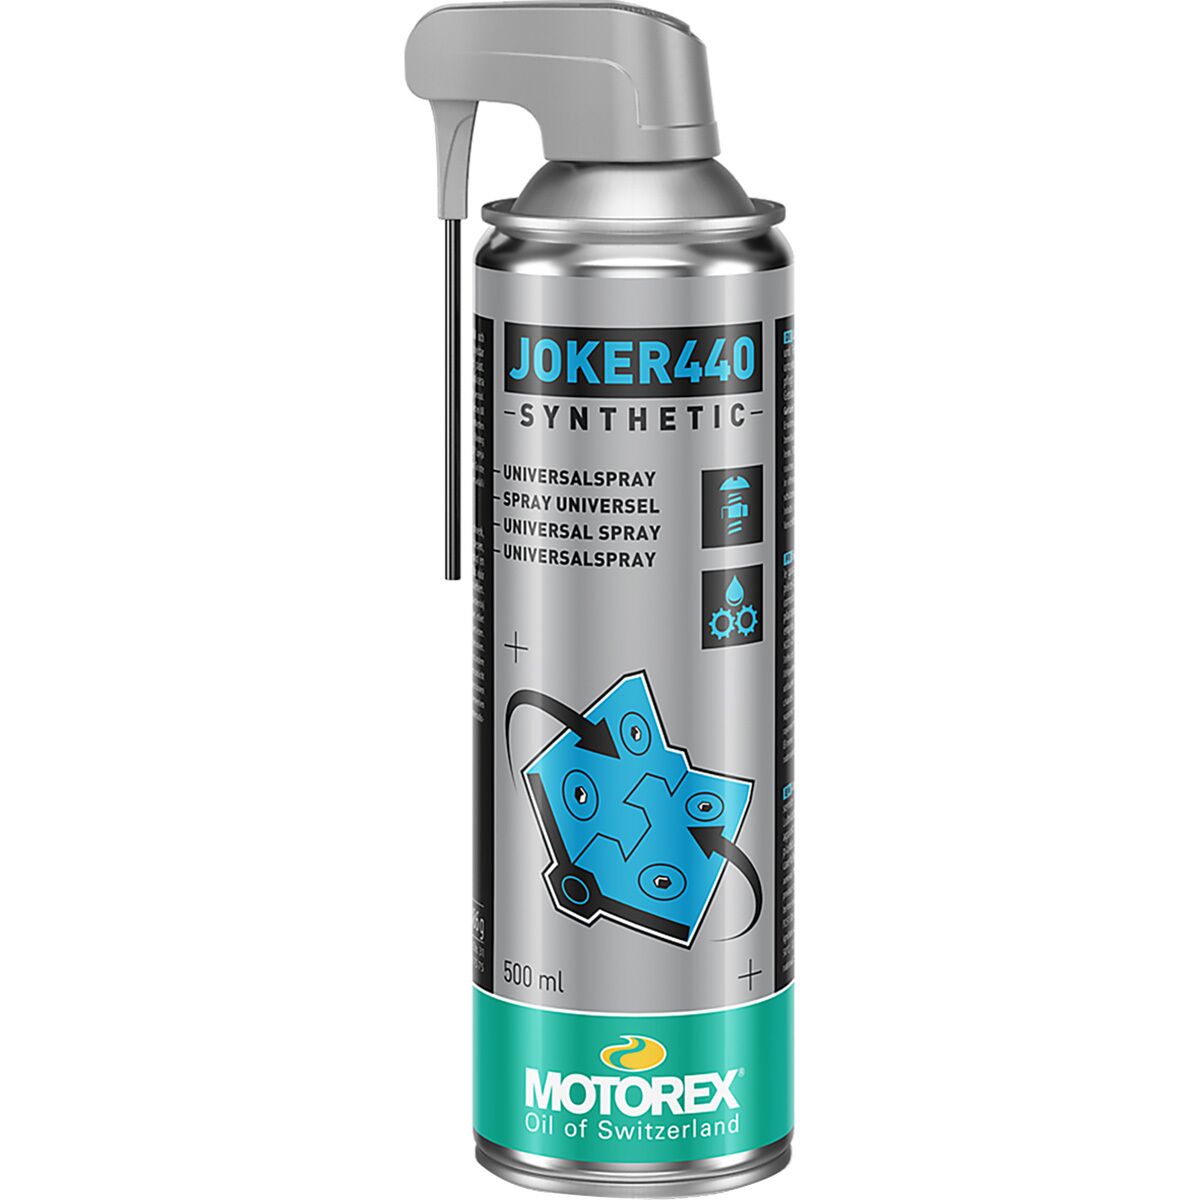 Motorex Joker 440 Synthetic One Color, One Size